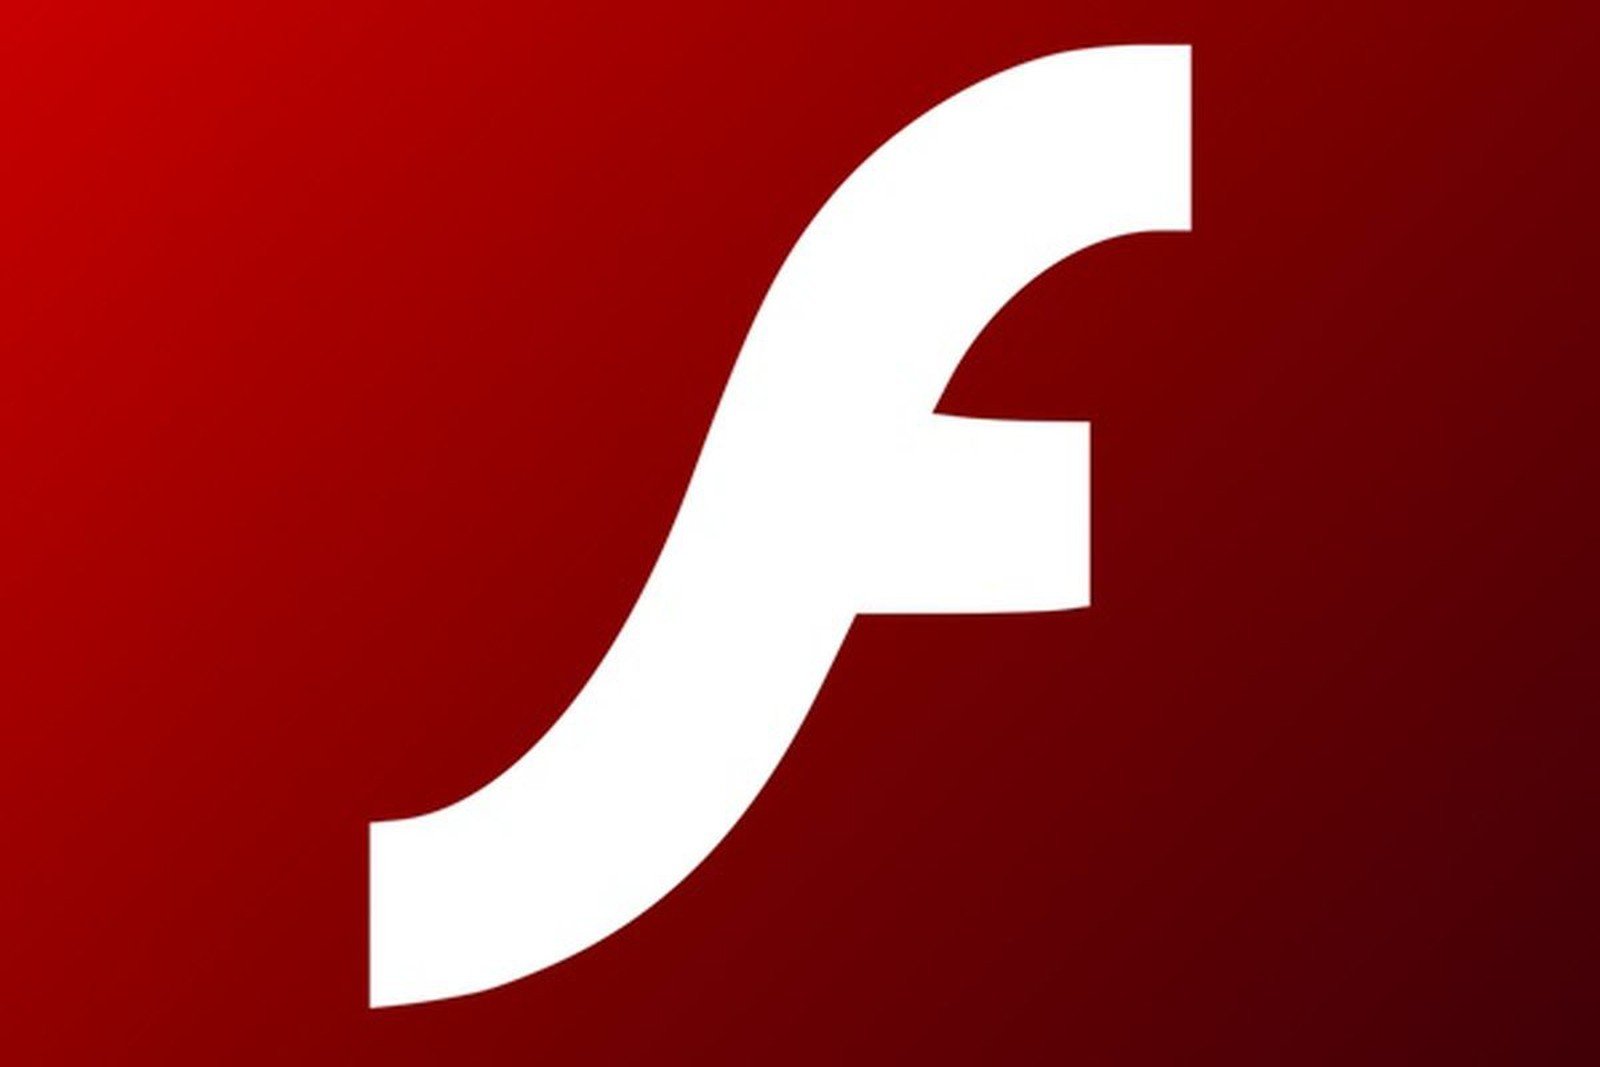 Microsoft rolling out a Windows 10 update to remove Adobe Flash Player